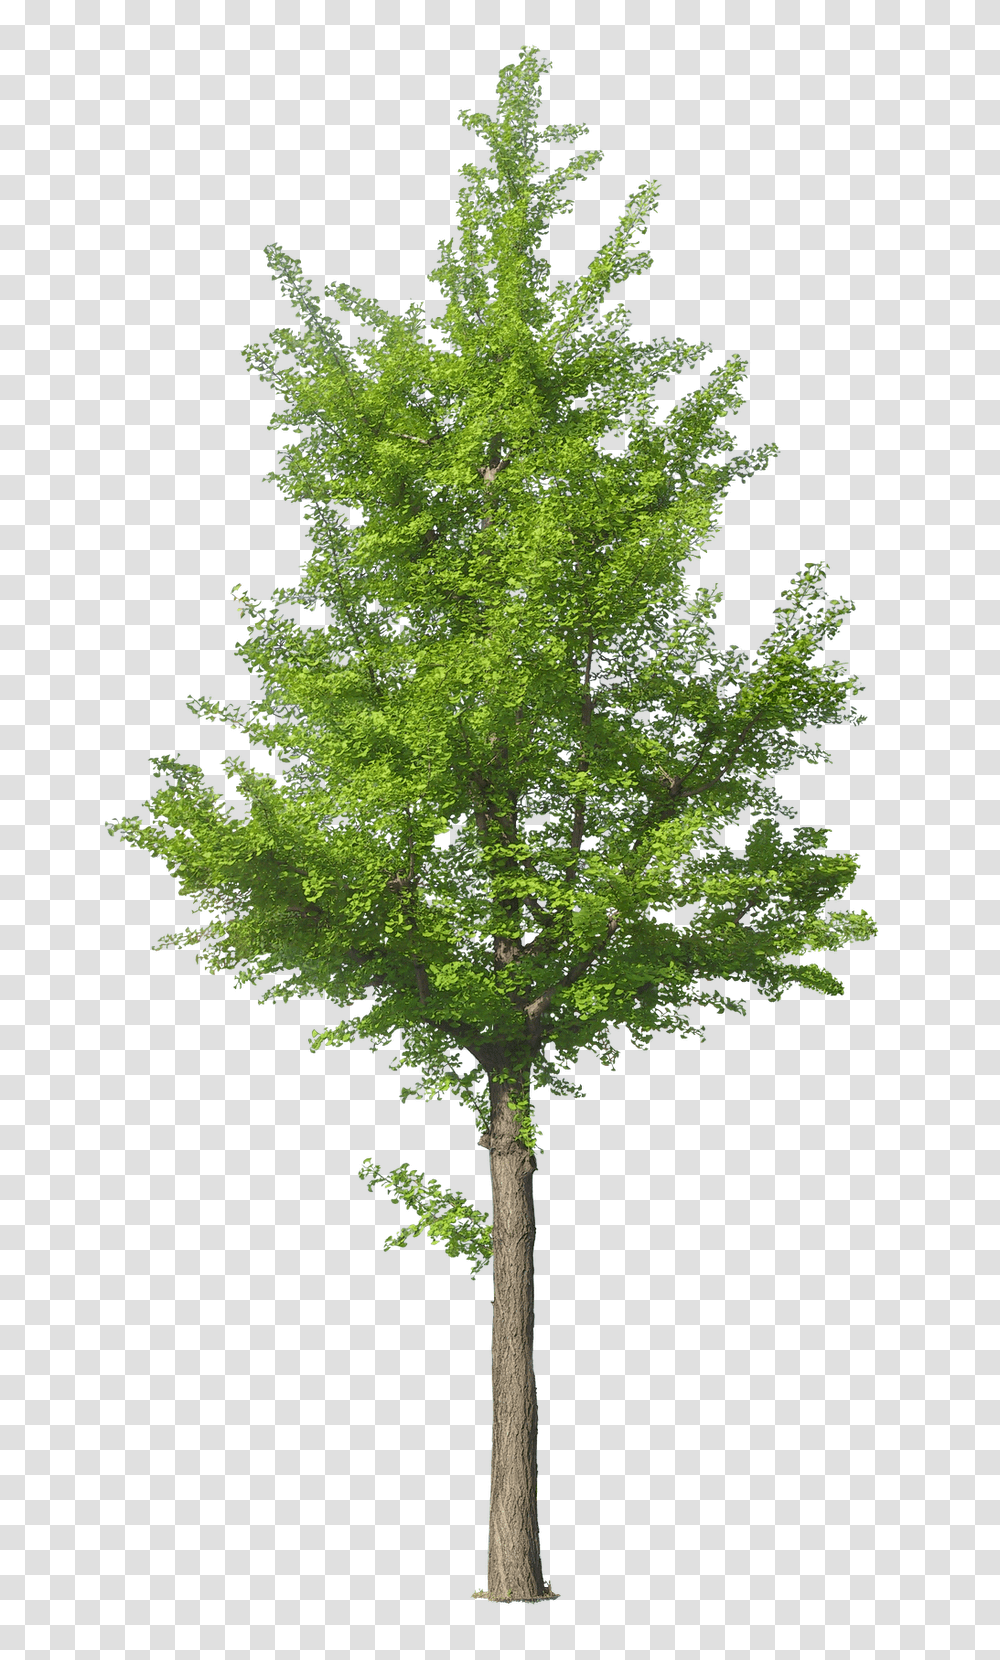 Download Hd Tree Psd Photoshop Tree Front View, Plant, Cross, Symbol, Maple Transparent Png